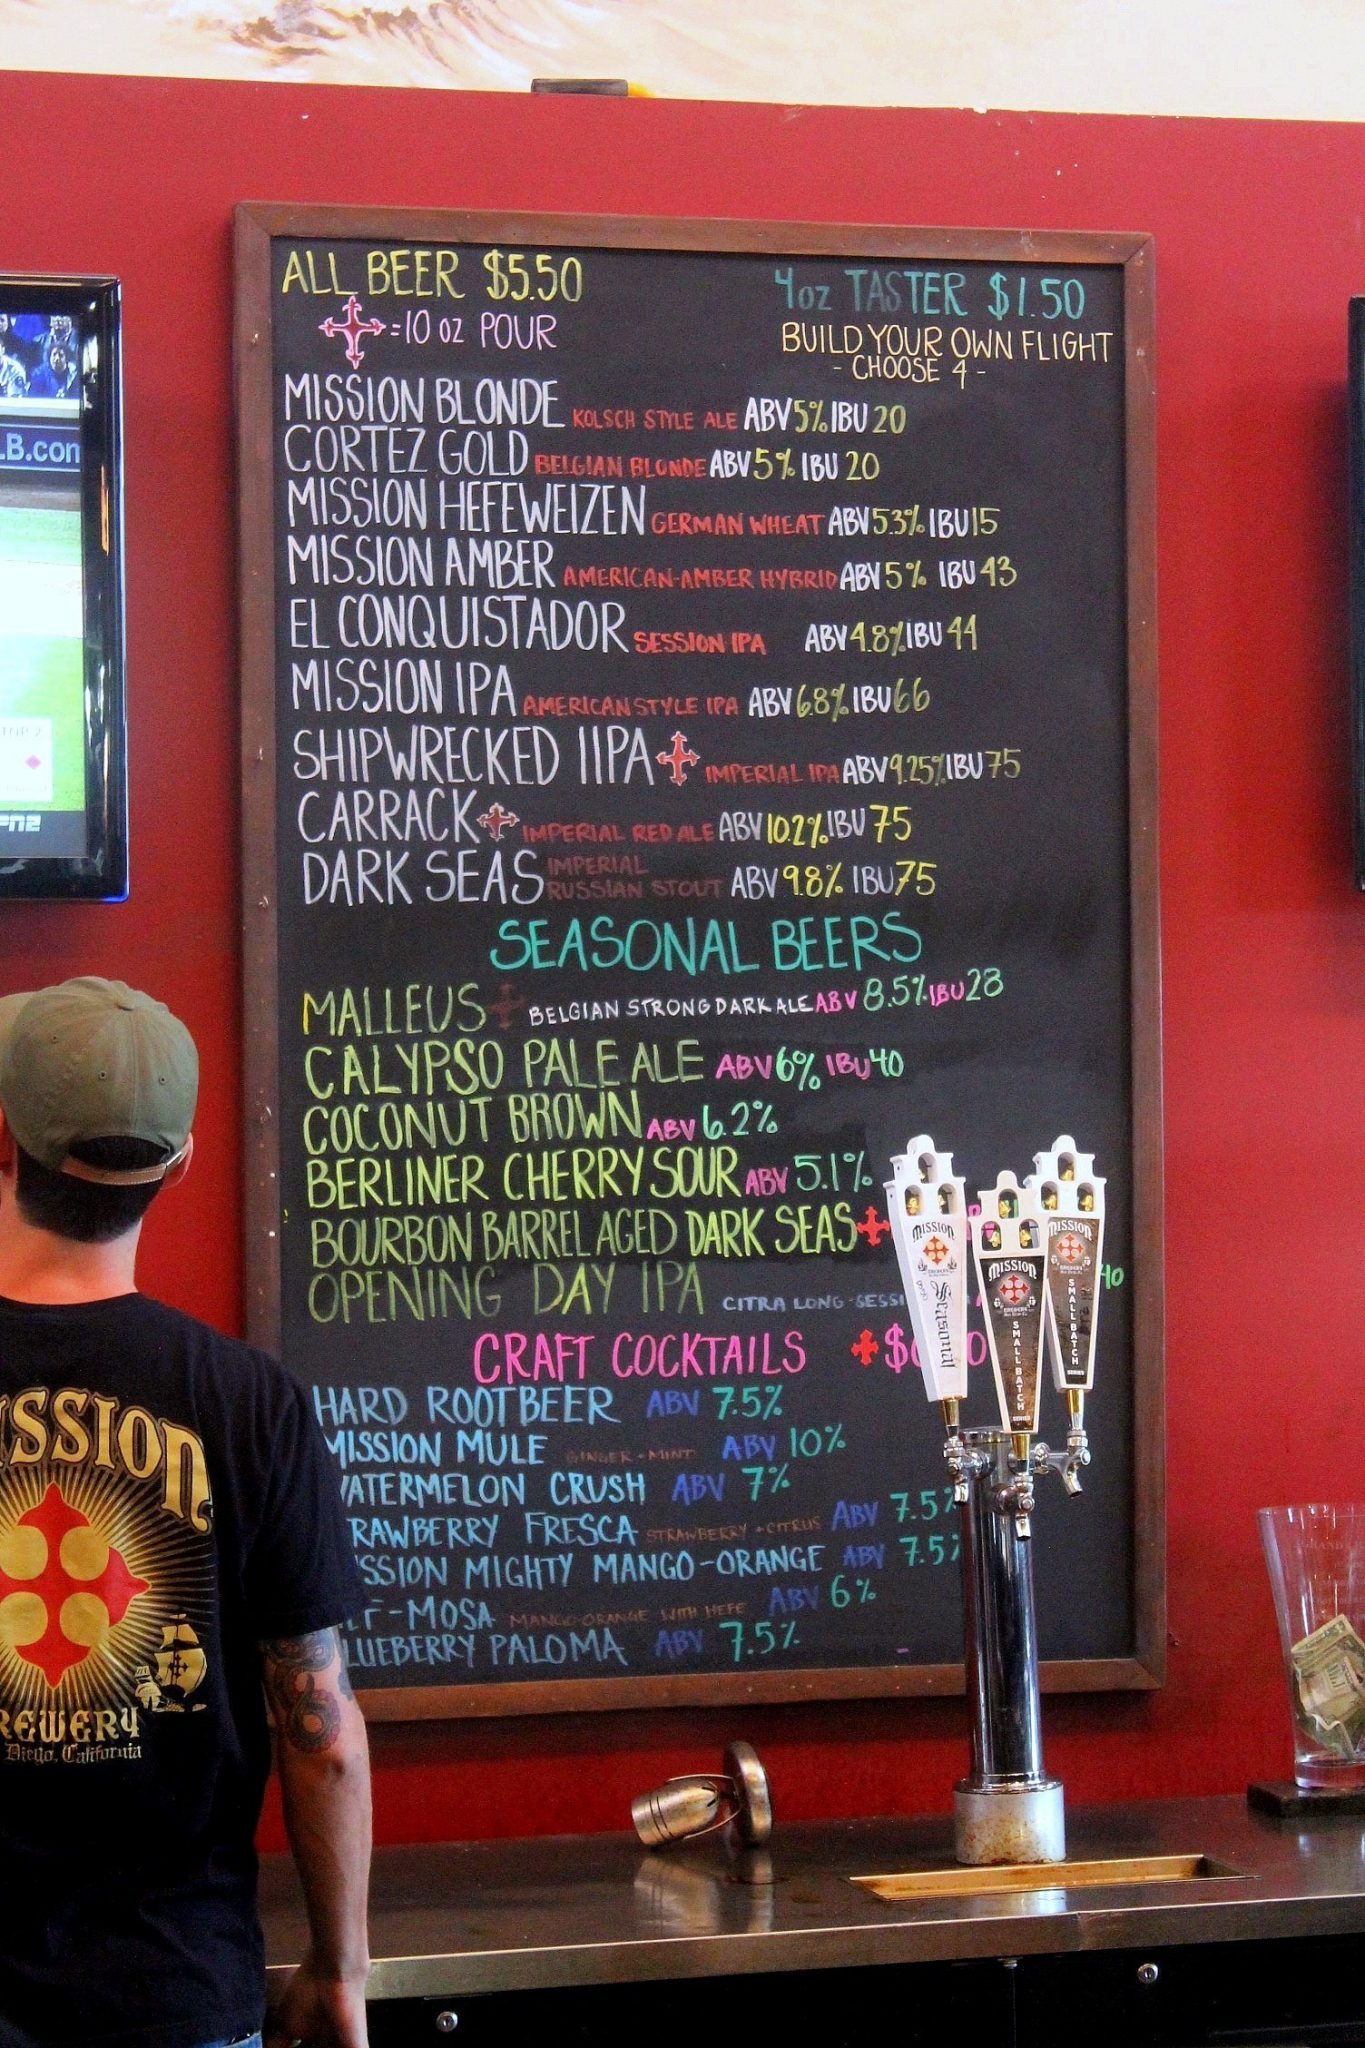 Mission Brewery - San Diego, California - Top California Breweries